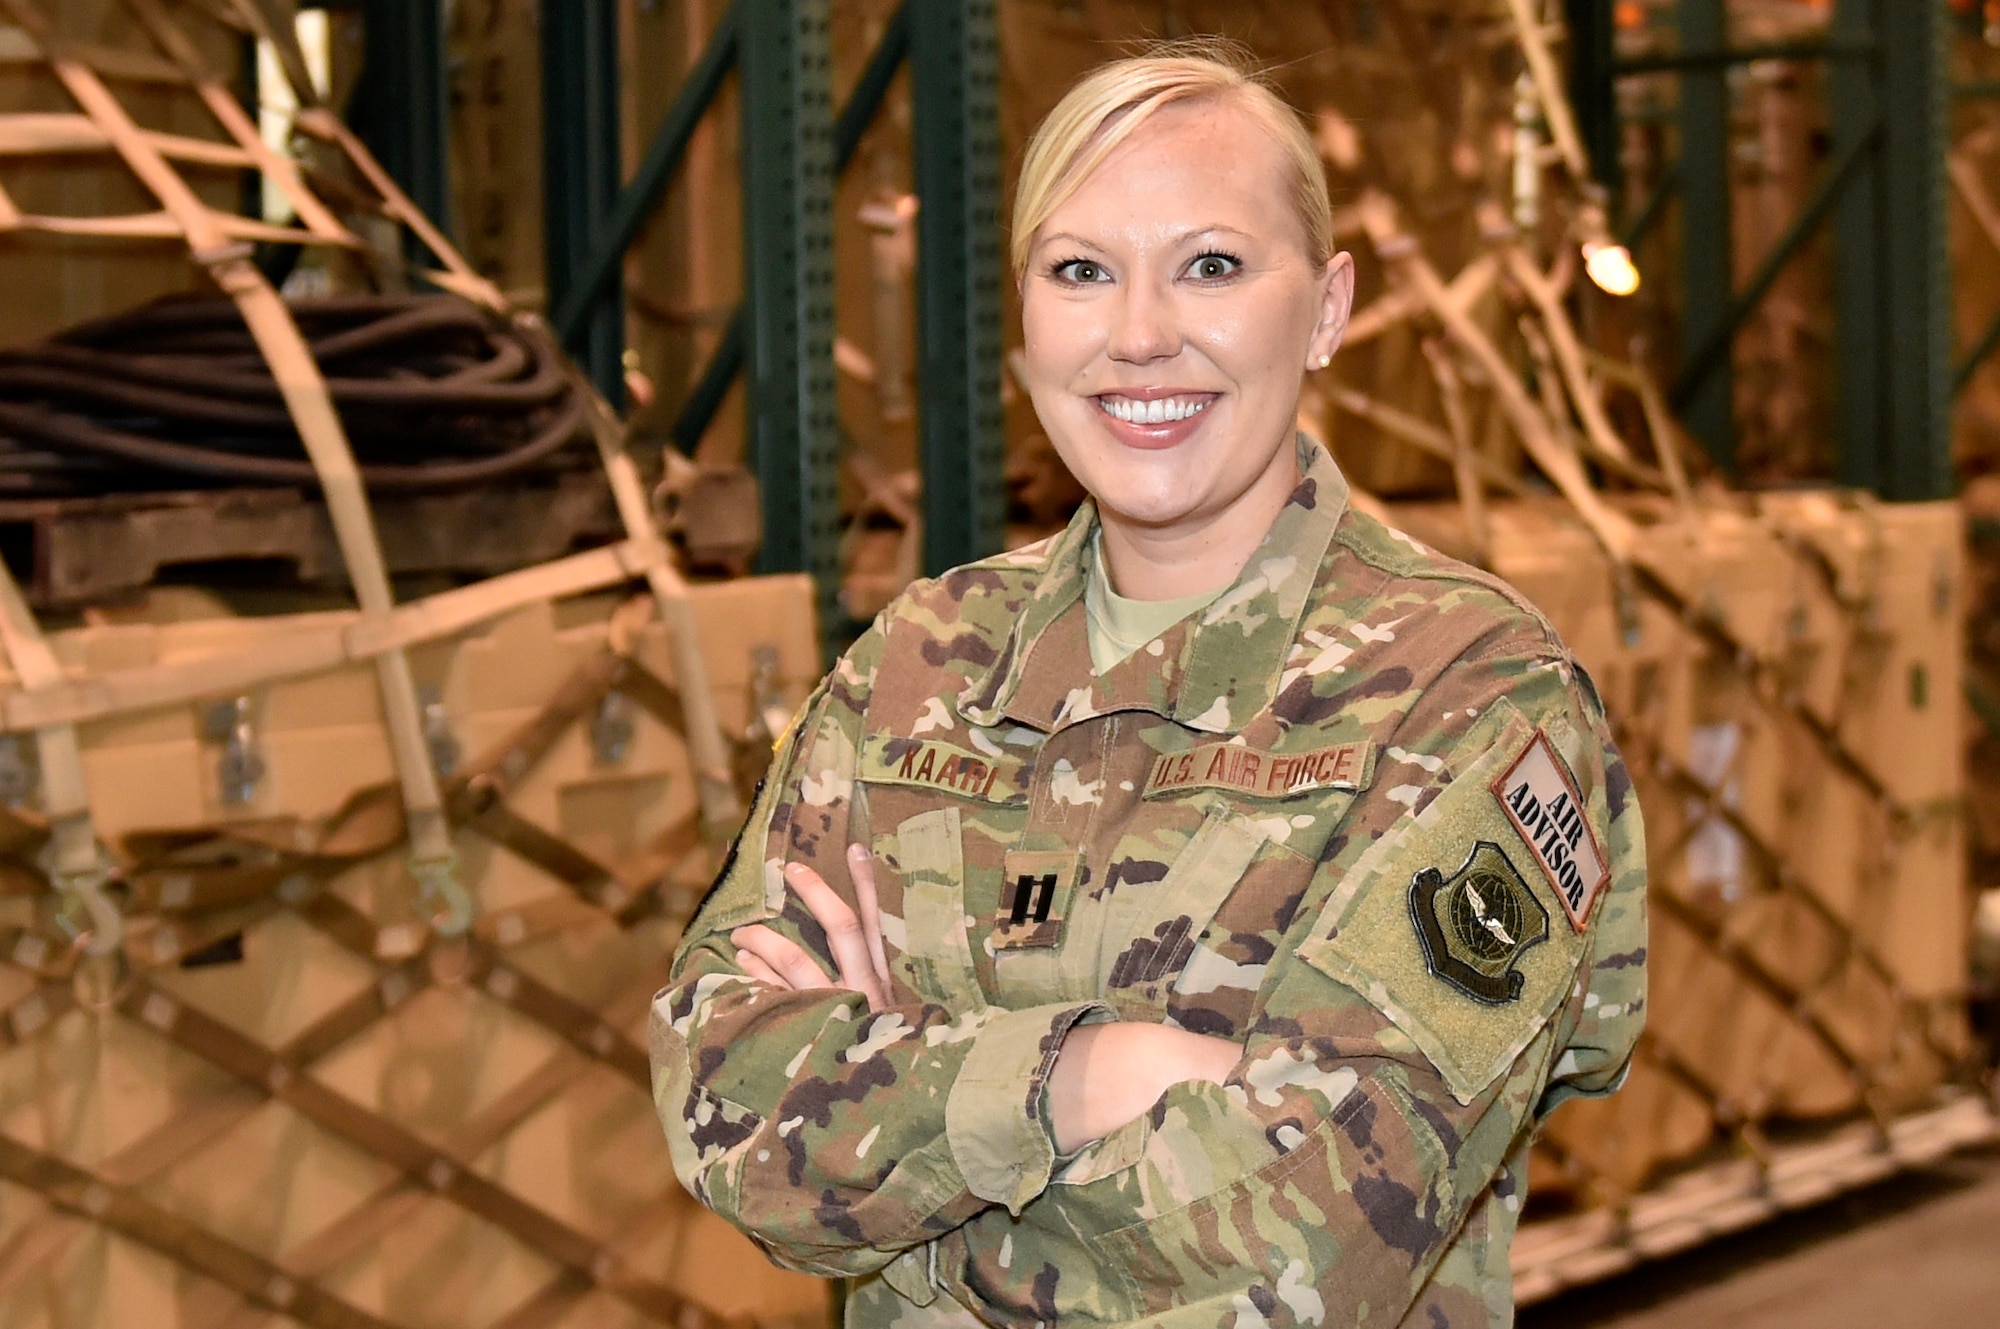 Capt. Stephanie Kaari a Logistics Officer assigned to the 571st Mobility Support Advisory Squadron, at Travis Air Force Base, Calif., recently received notification she was selected to attend the 2018 United Nations Logistics Officer Course in Bangladesh starting this fall. The board considered 30 applicants before selecting Kaari to be the first U.S. Air Force representative to attend the UN Logistics Officer Course. The course prepares participants for work in all aspects of logistics in a UN operation, including the ability to differentiate between national and UN logistic responsibilities. (U.S. Air Force photo by Teach. Sgt. Liliana Moreno/Released)